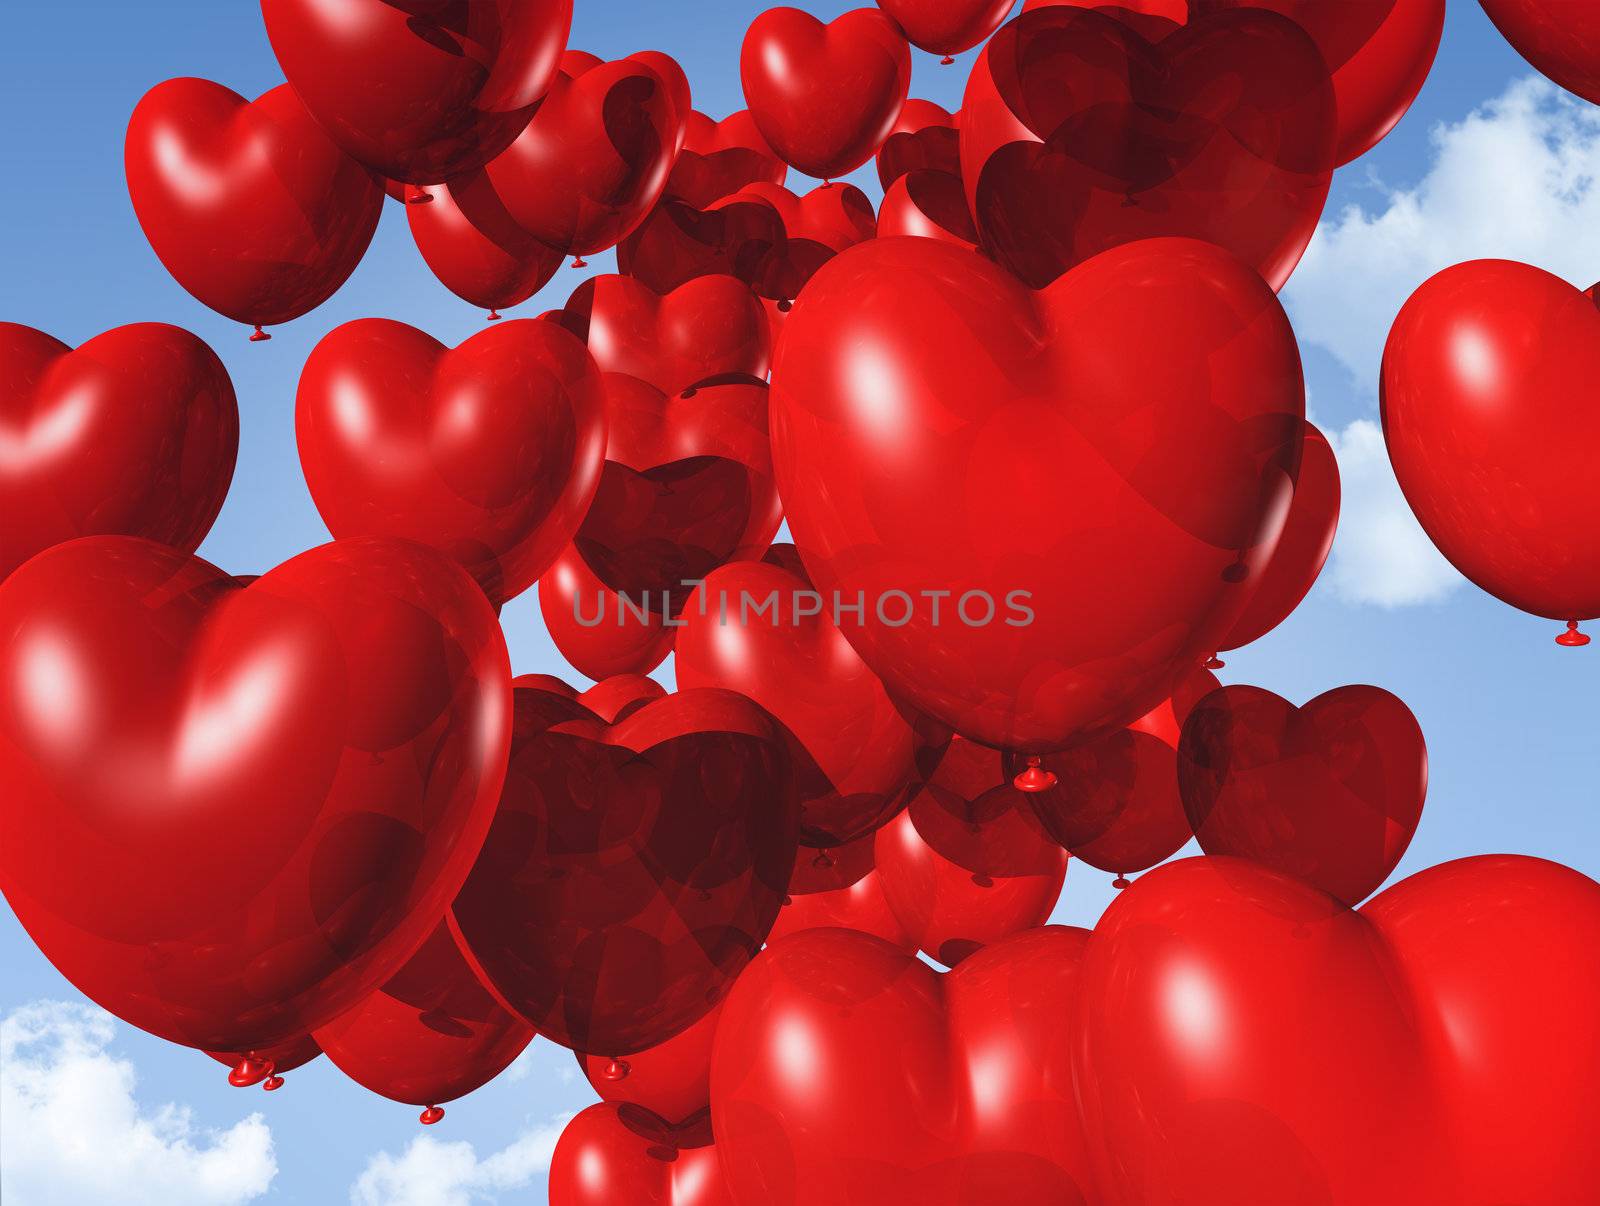 red heart shaped balloons floating in the sky - red heart shaped balloons floating in the sky. valentine's day symbol